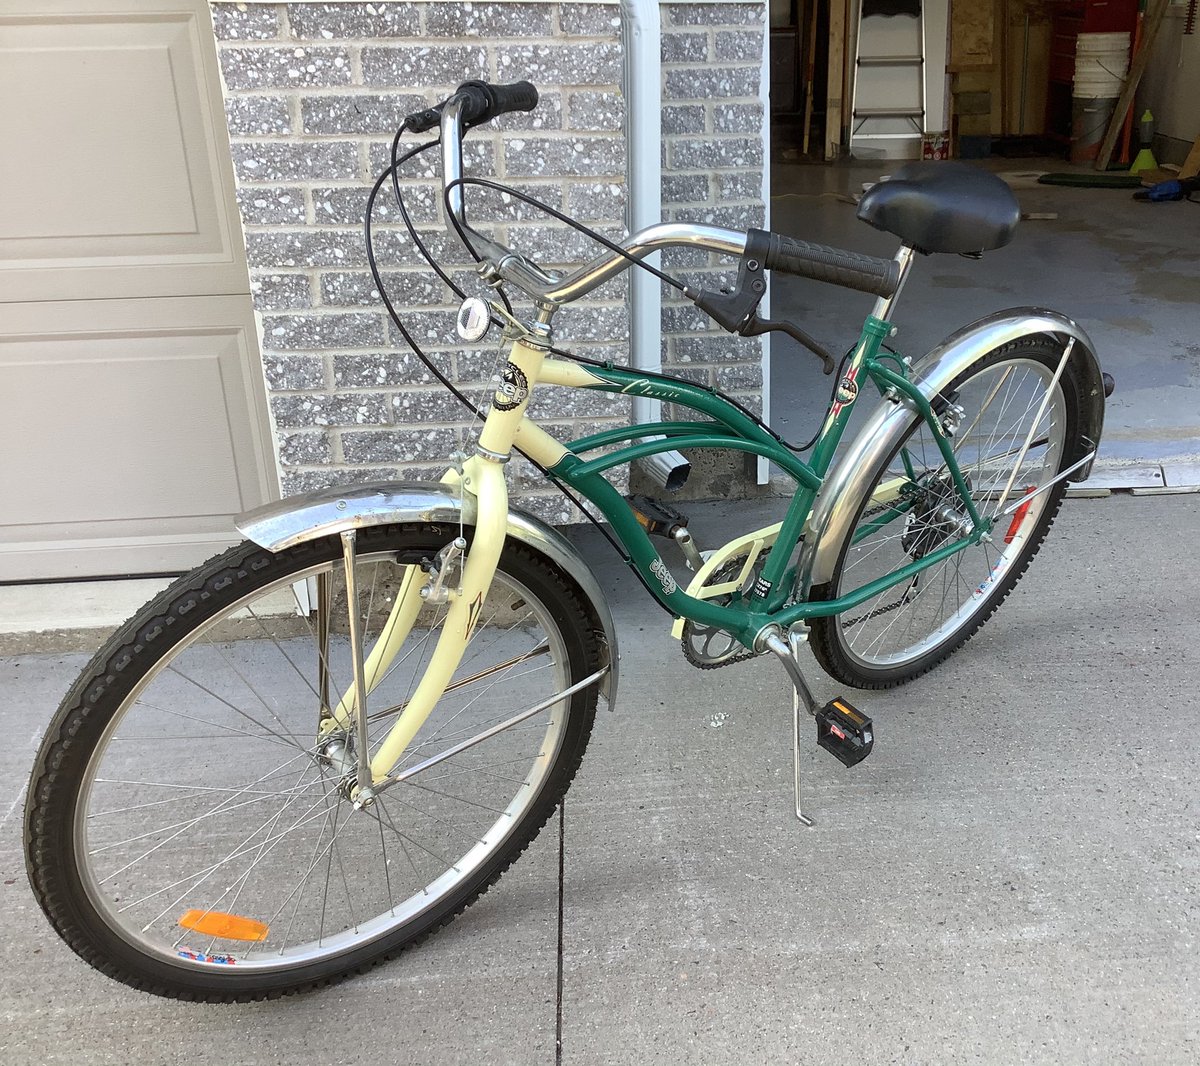  #2020gratitudeMy bicycle purchase. I’m gonna do a thread about how it has changed my year. Stay tuned. Will post it between now and Jan 1...lol.